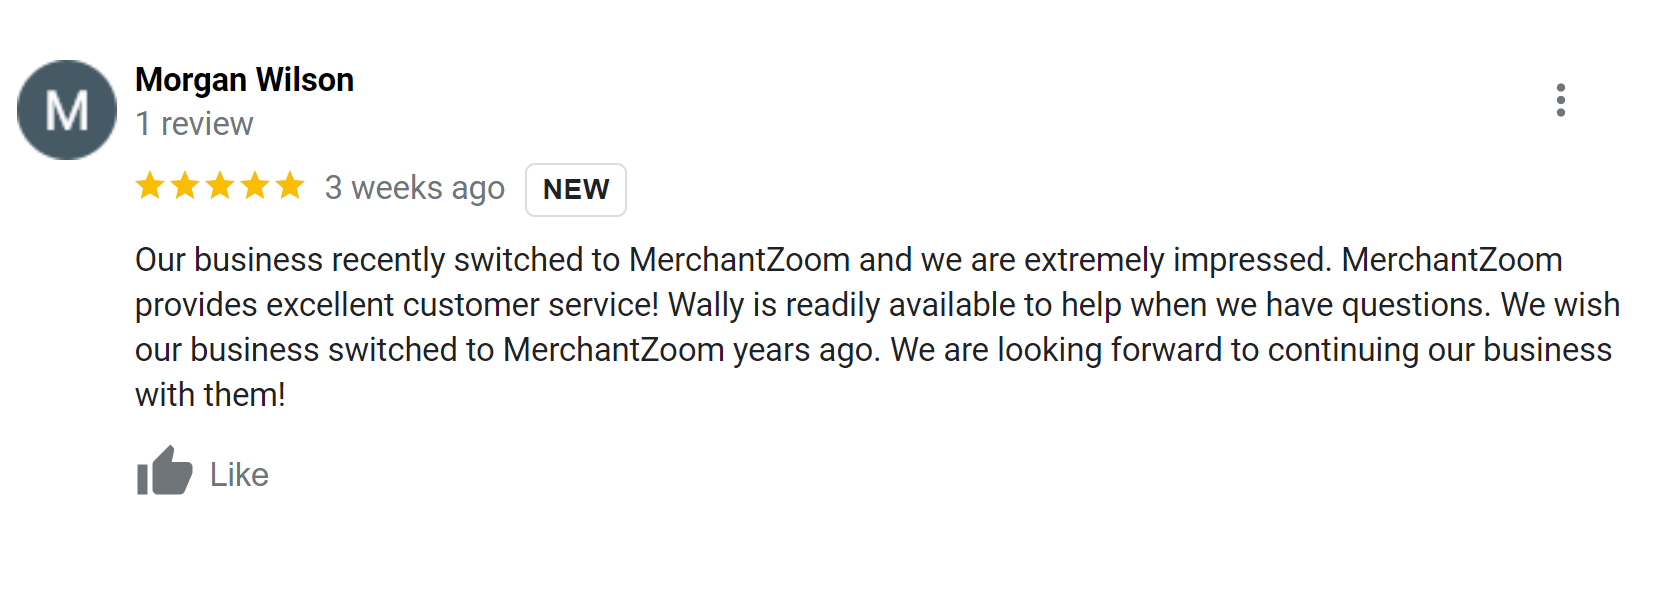 A review of wally 's new website.